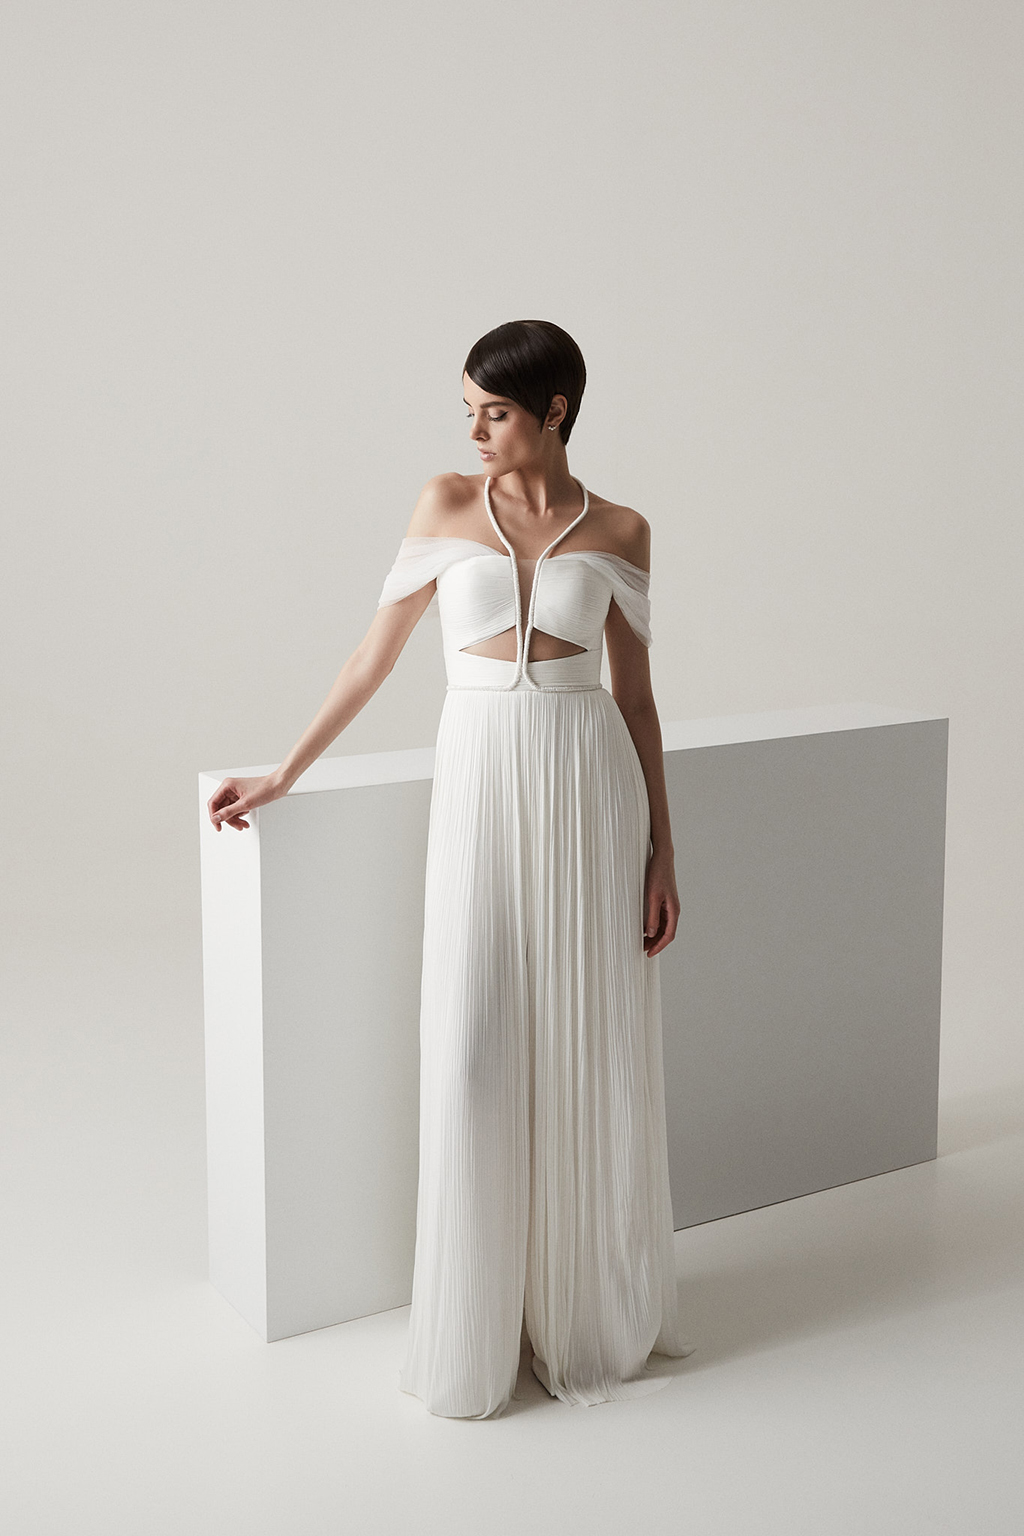 New Divine Atelier Wedding Dresses: Bridal Collections by Season